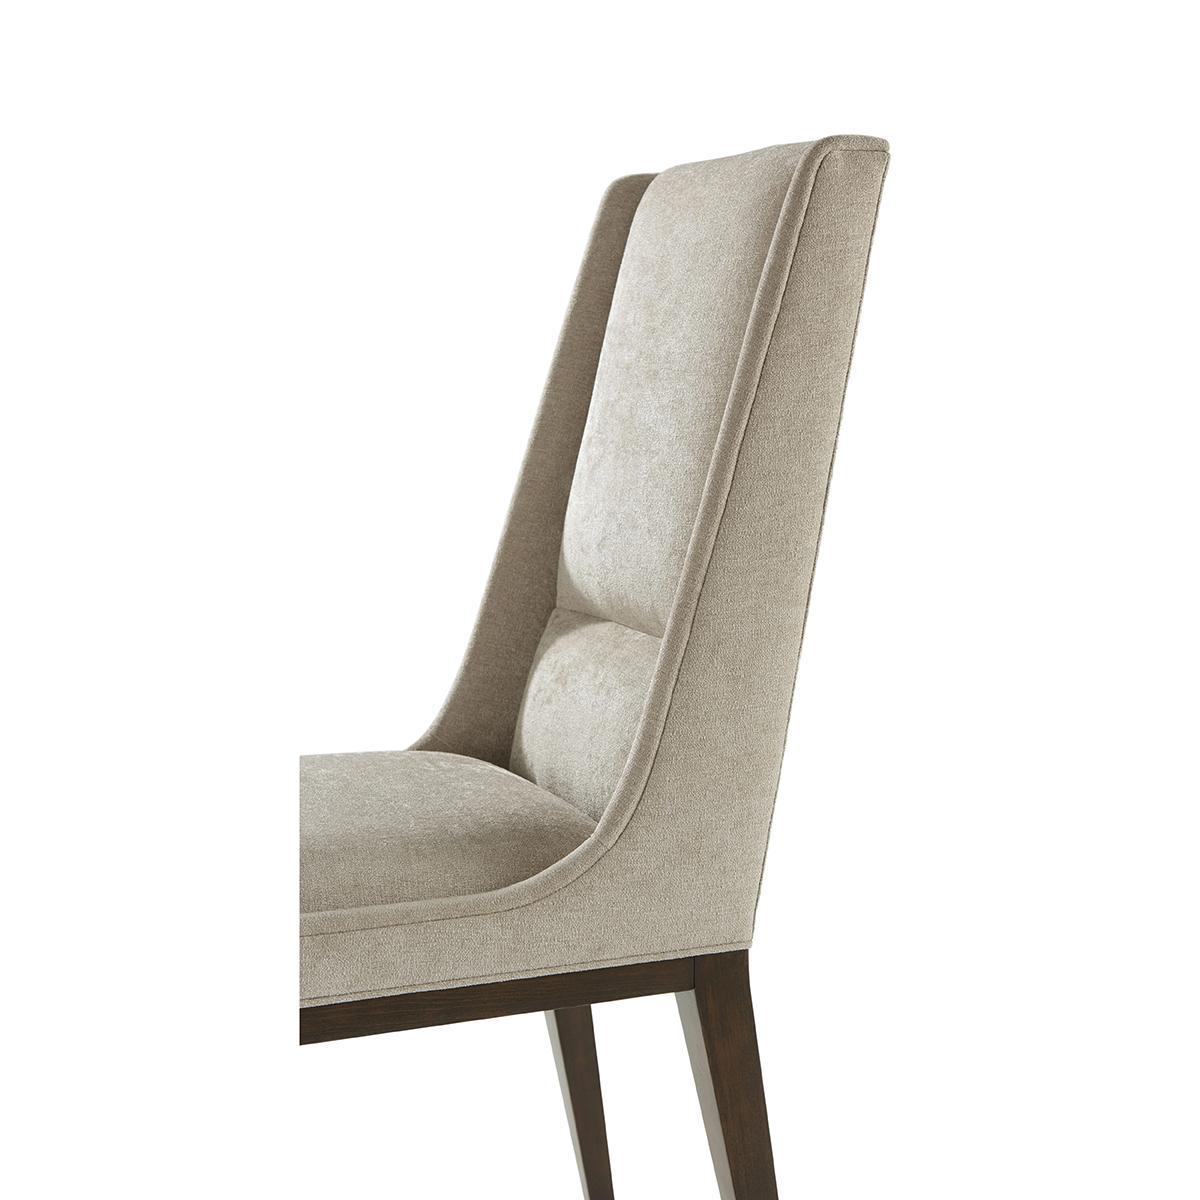 Vietnamese Midcentury Upholstered Dining Chair For Sale